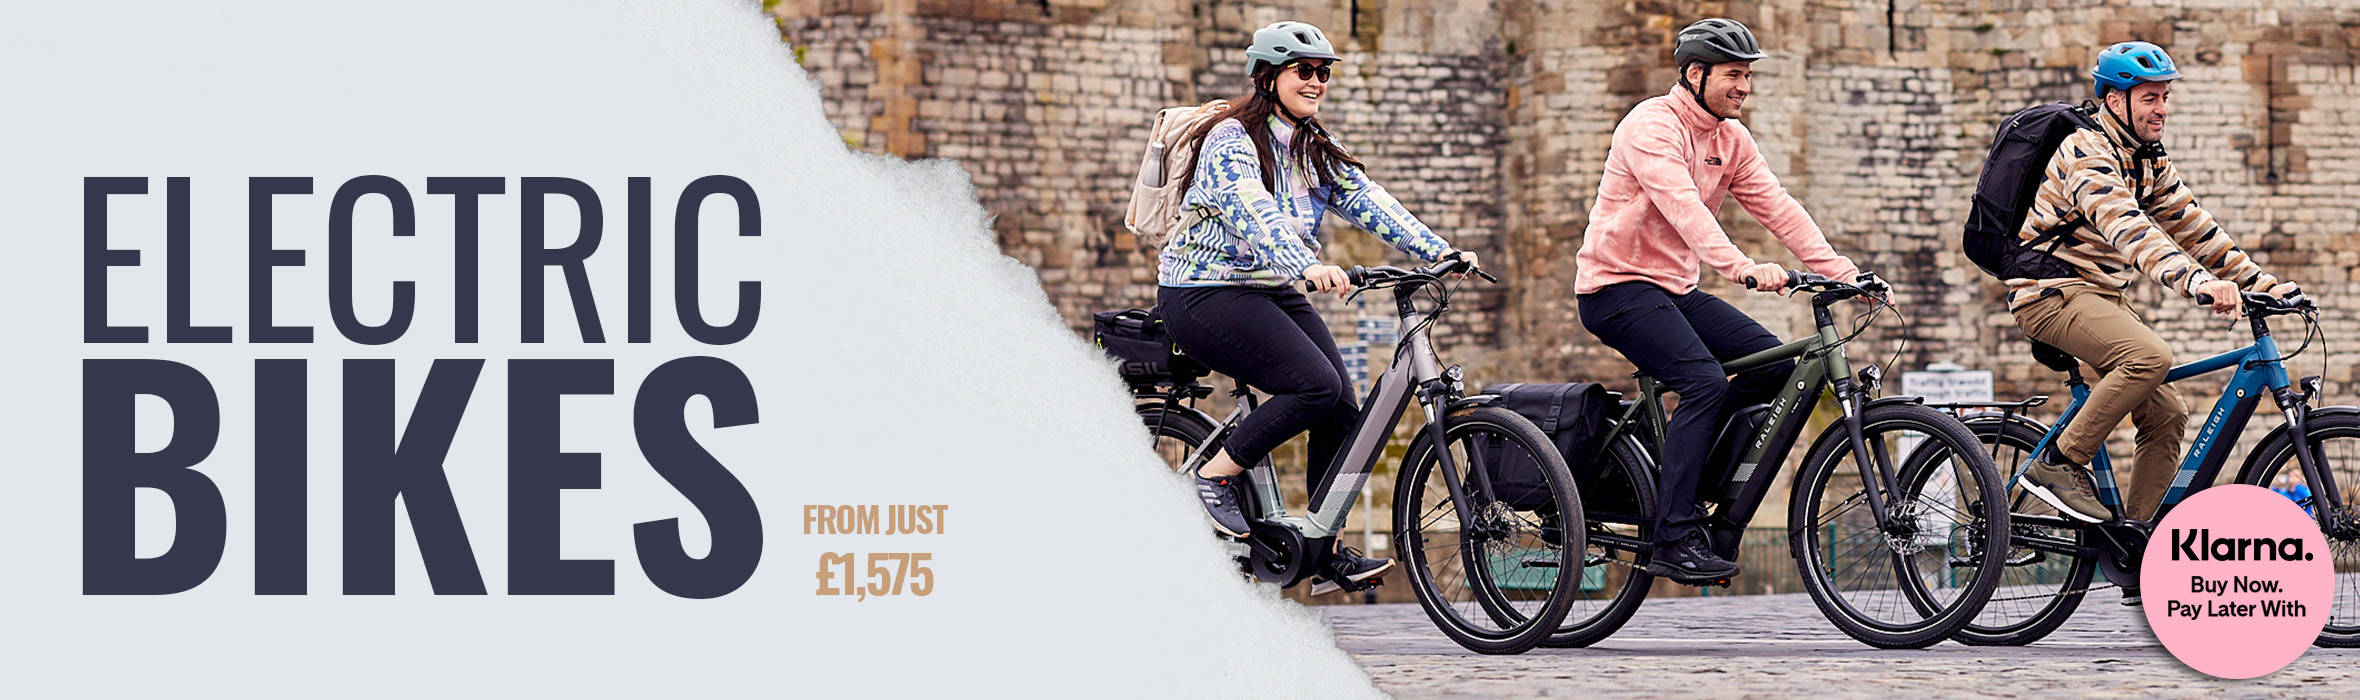 Electric Bikes from just £1,575